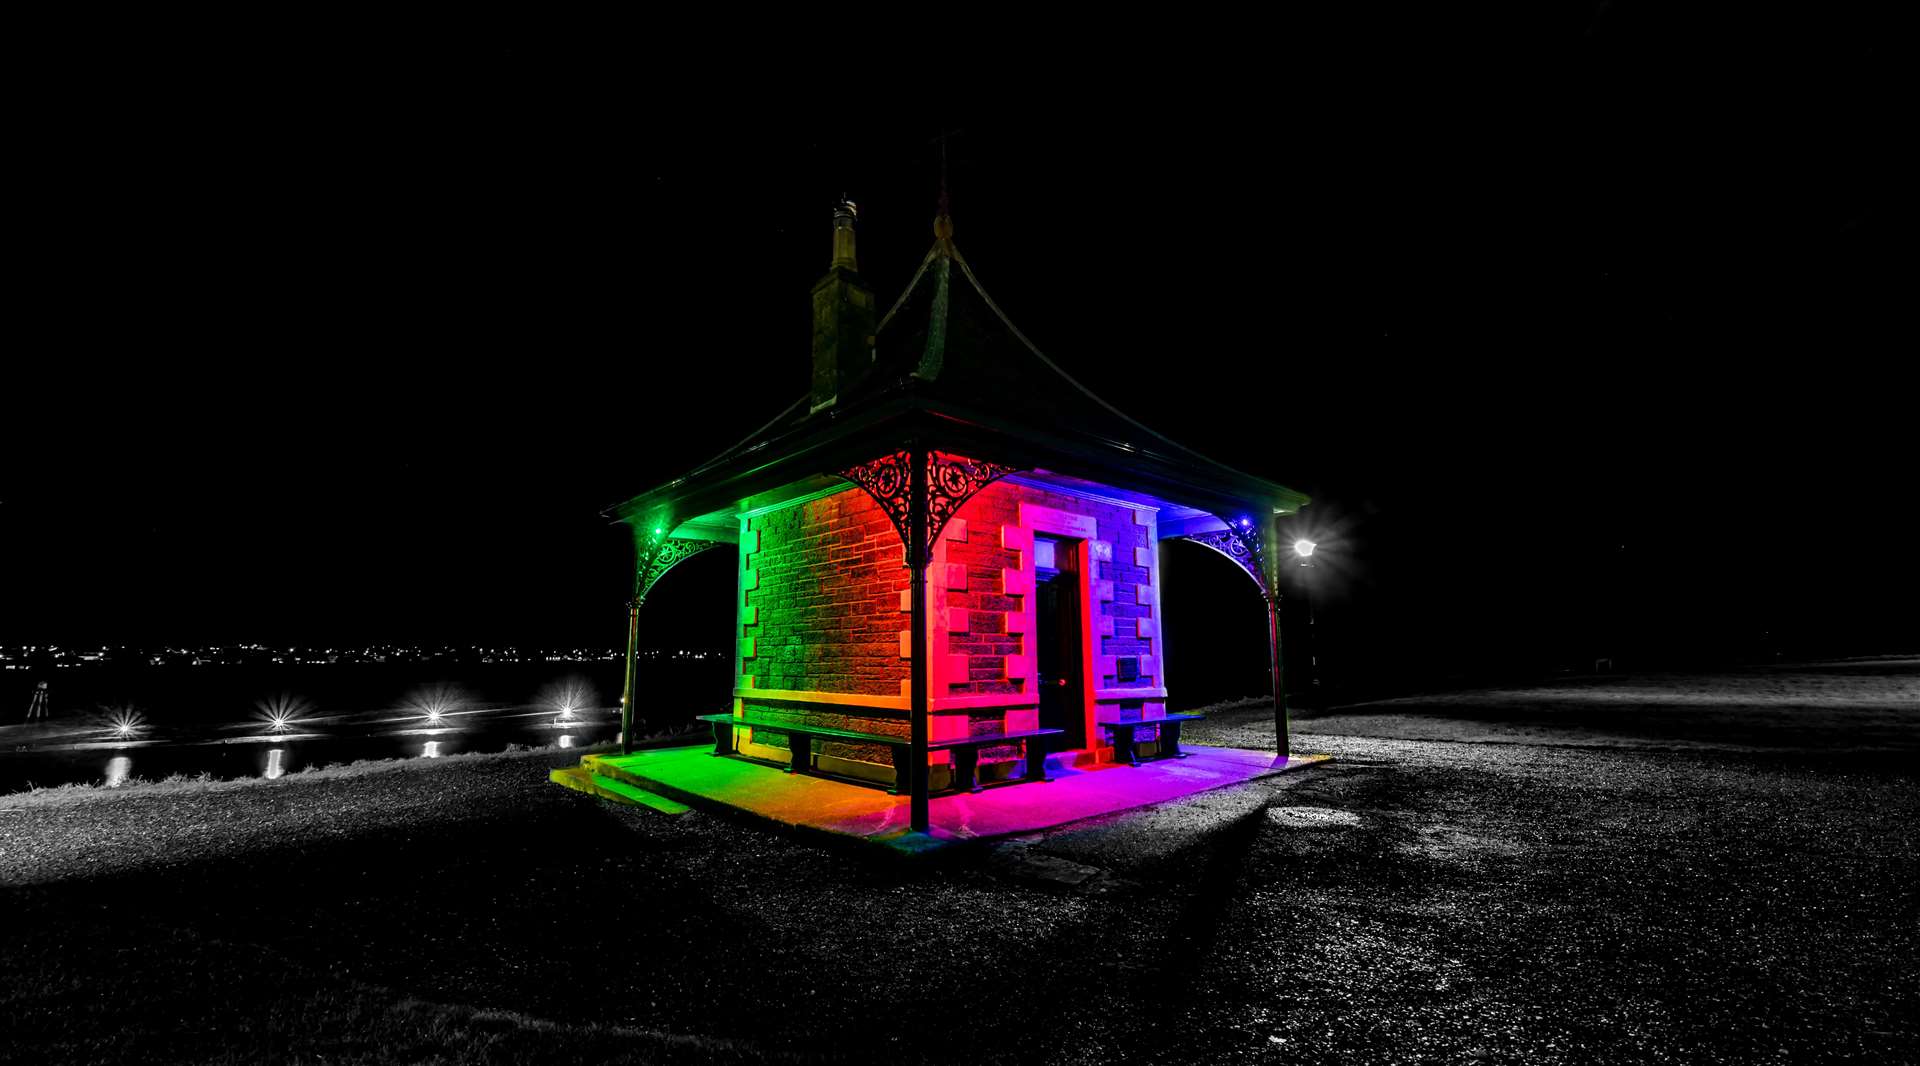 This shot of Wick's Pilot House at night, by Alisdair MacKechnie, was selected as the cover shot in the 2023 calendar.